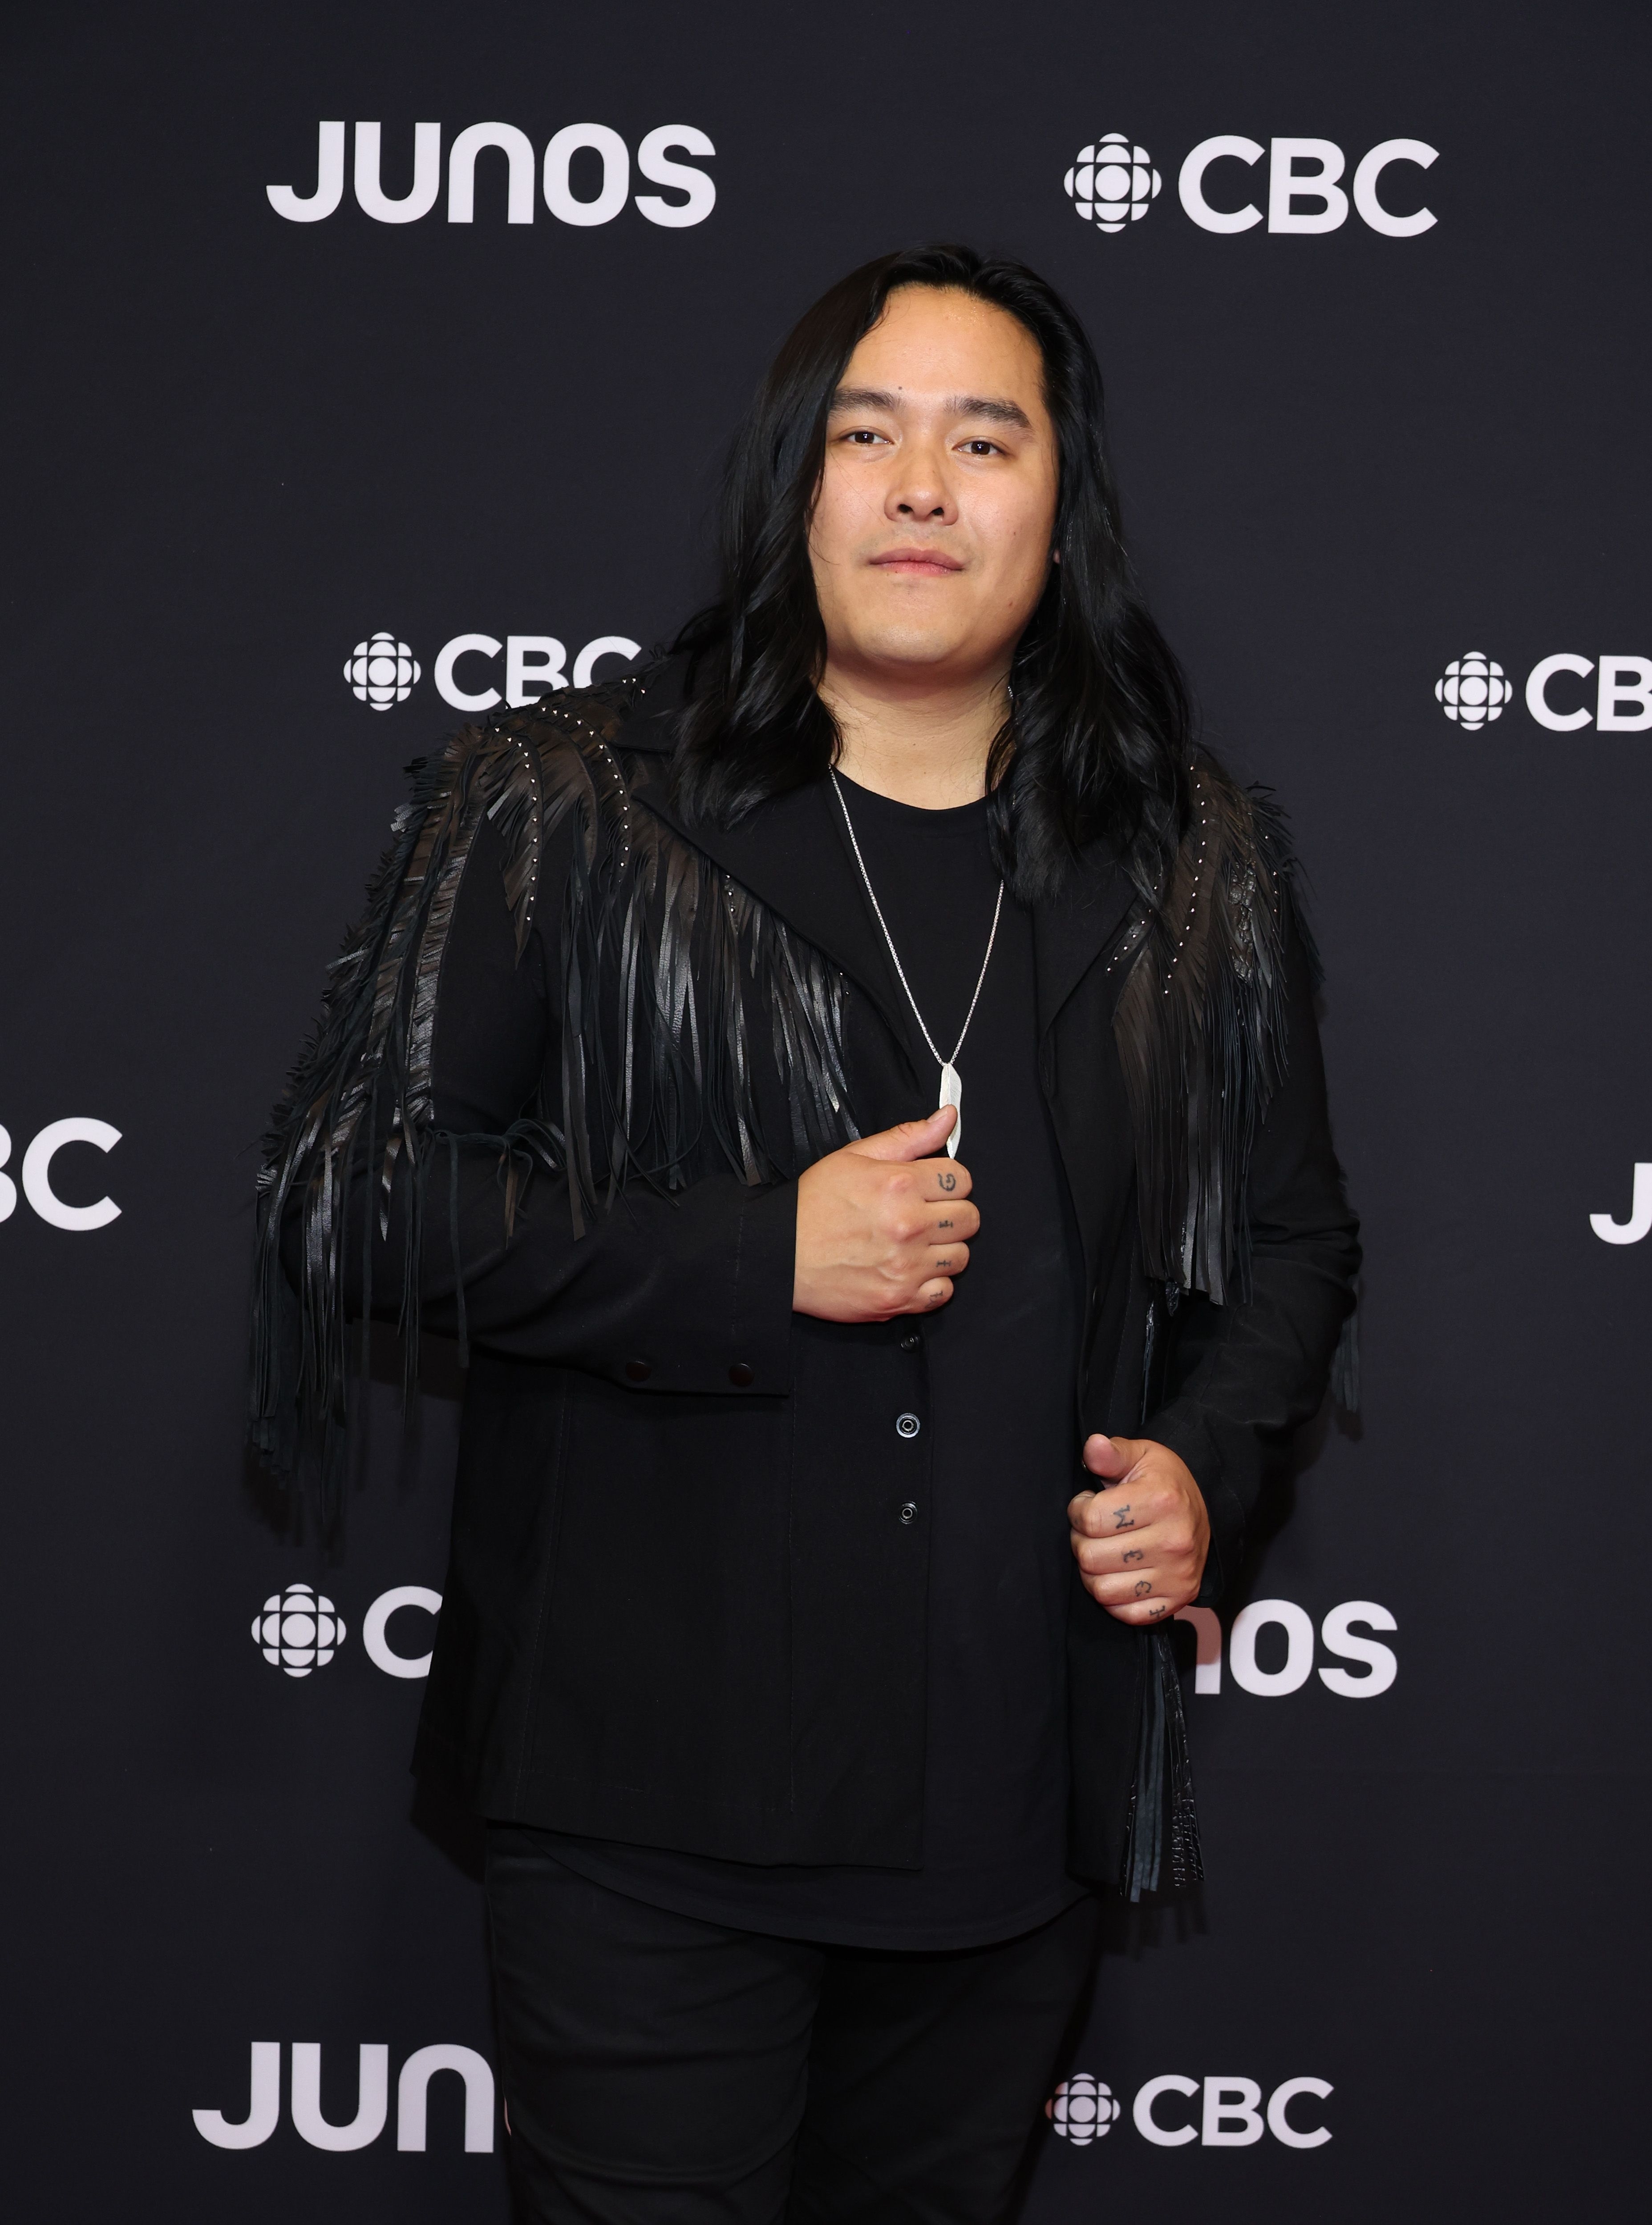 Person in black attire with feathered accents posing at the JUNOS CBC event